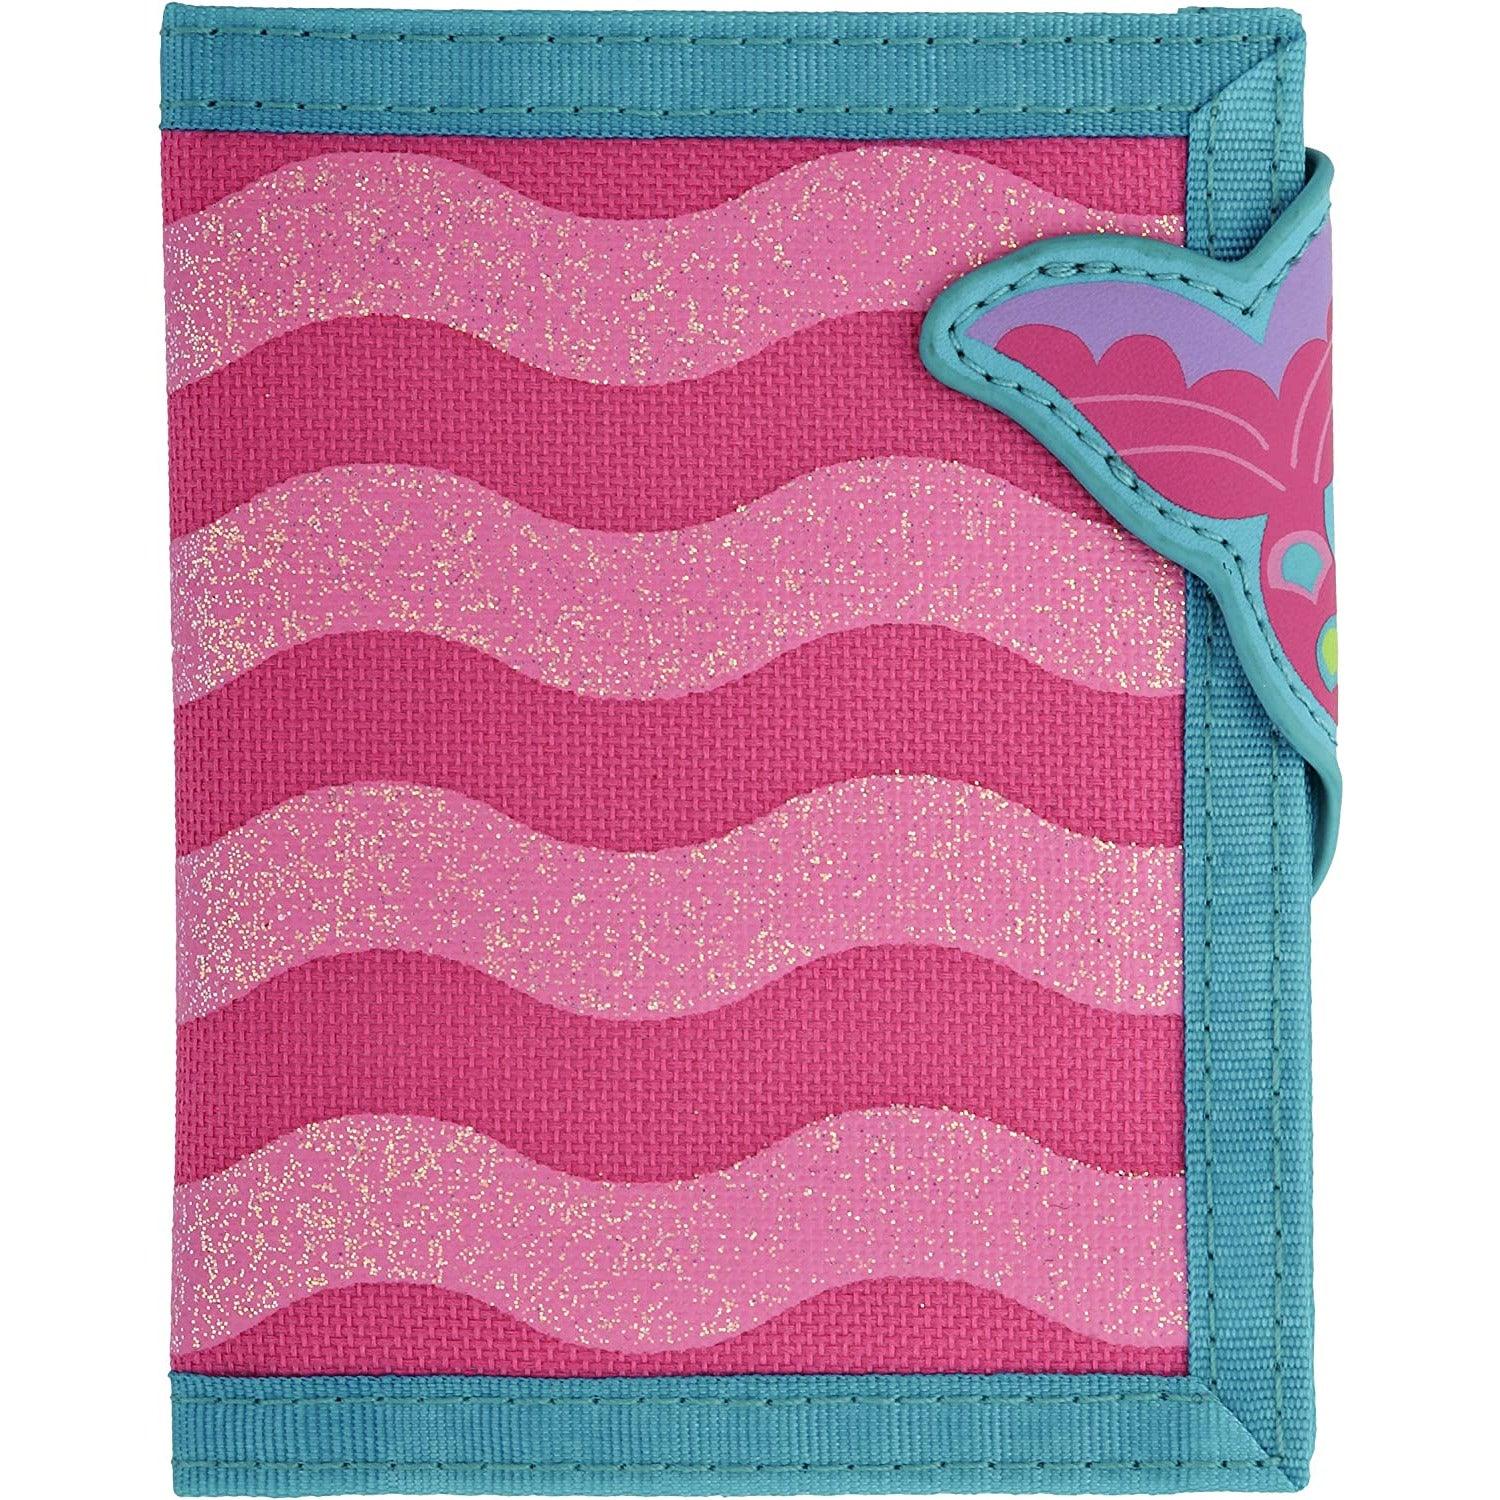 Stephen Joseph Kids Wallet One Size - Mermaid - BumbleToys - 14 Years & Up, 5-7 Years, 8-13 Years, Bags, Characters, Girls, Mermaid, Stephen Joseph, Wallet